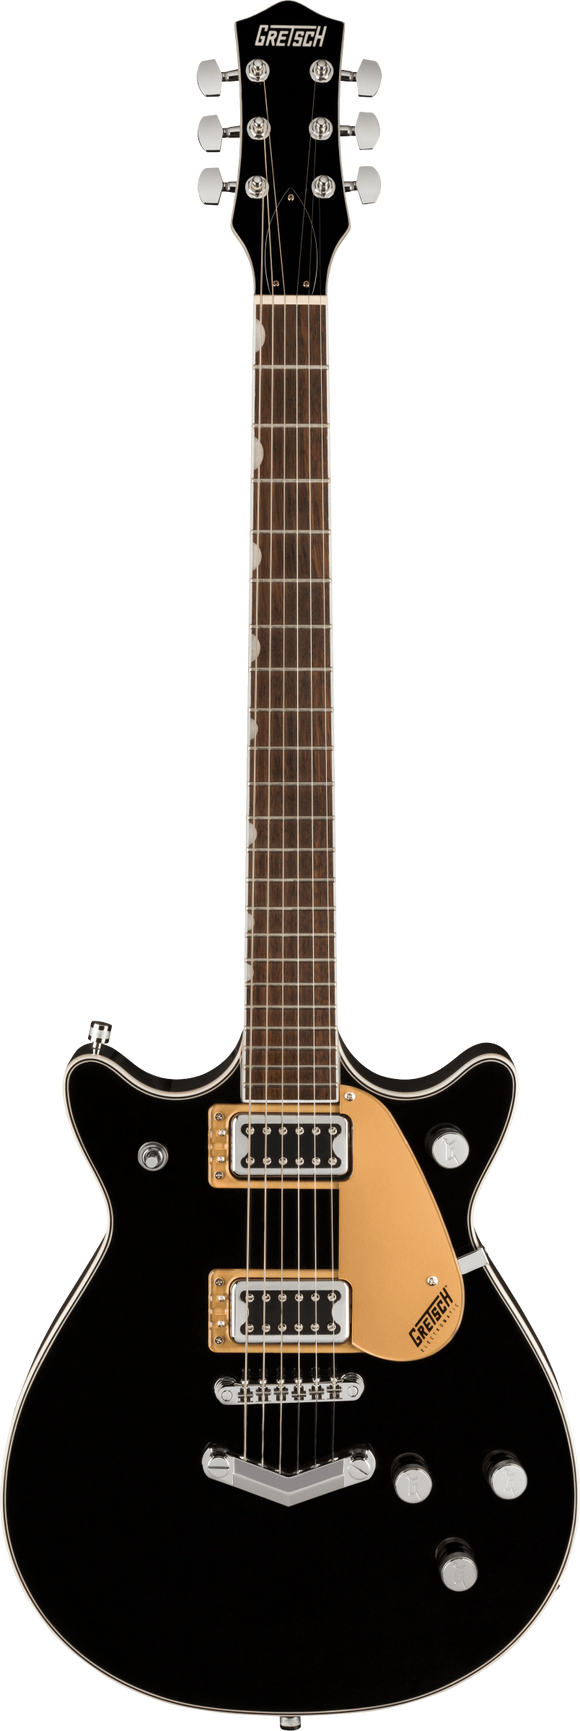 Gretsch G5222 Electromatic Double Jet BT with V-Stoptail, Laurel Fingerboard, Black